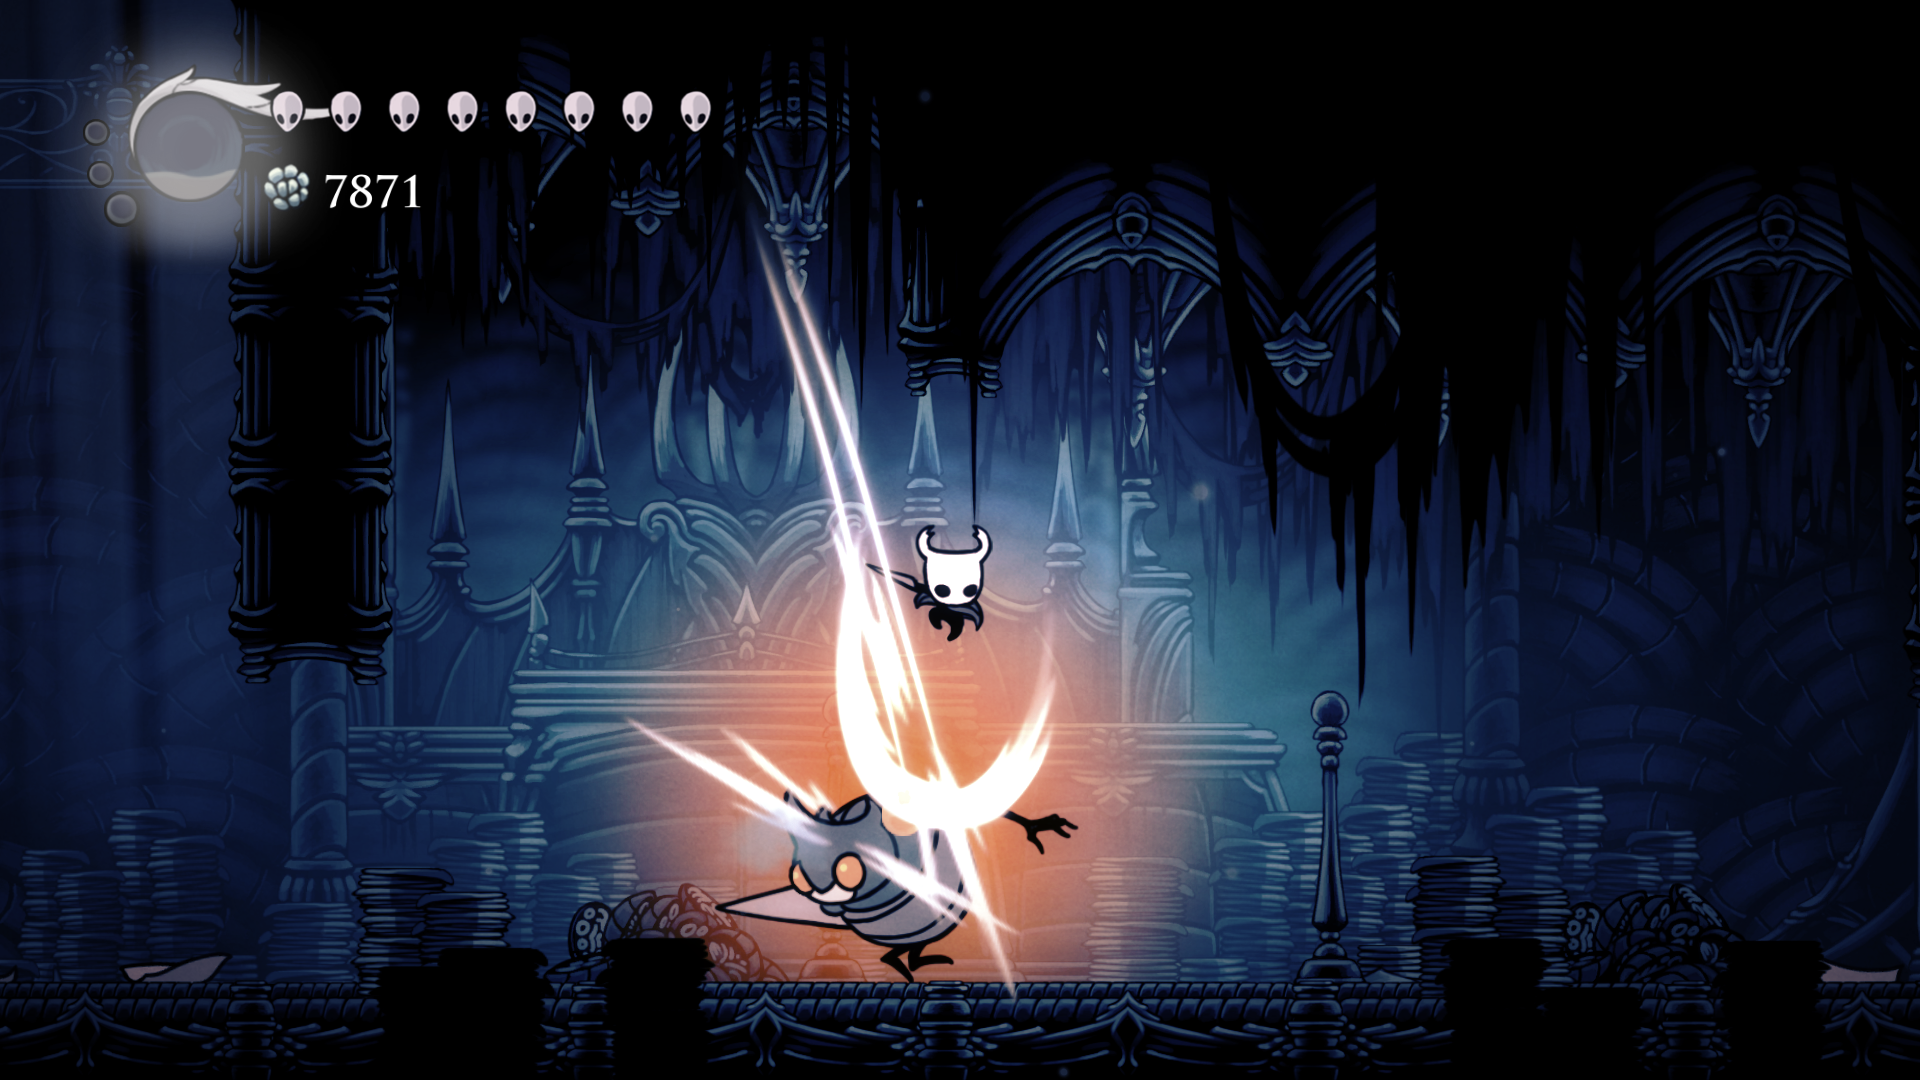 Of Hallownest, Hollow Knight Maps Of Hallownest, Hollow Knight Maps Of Hall...